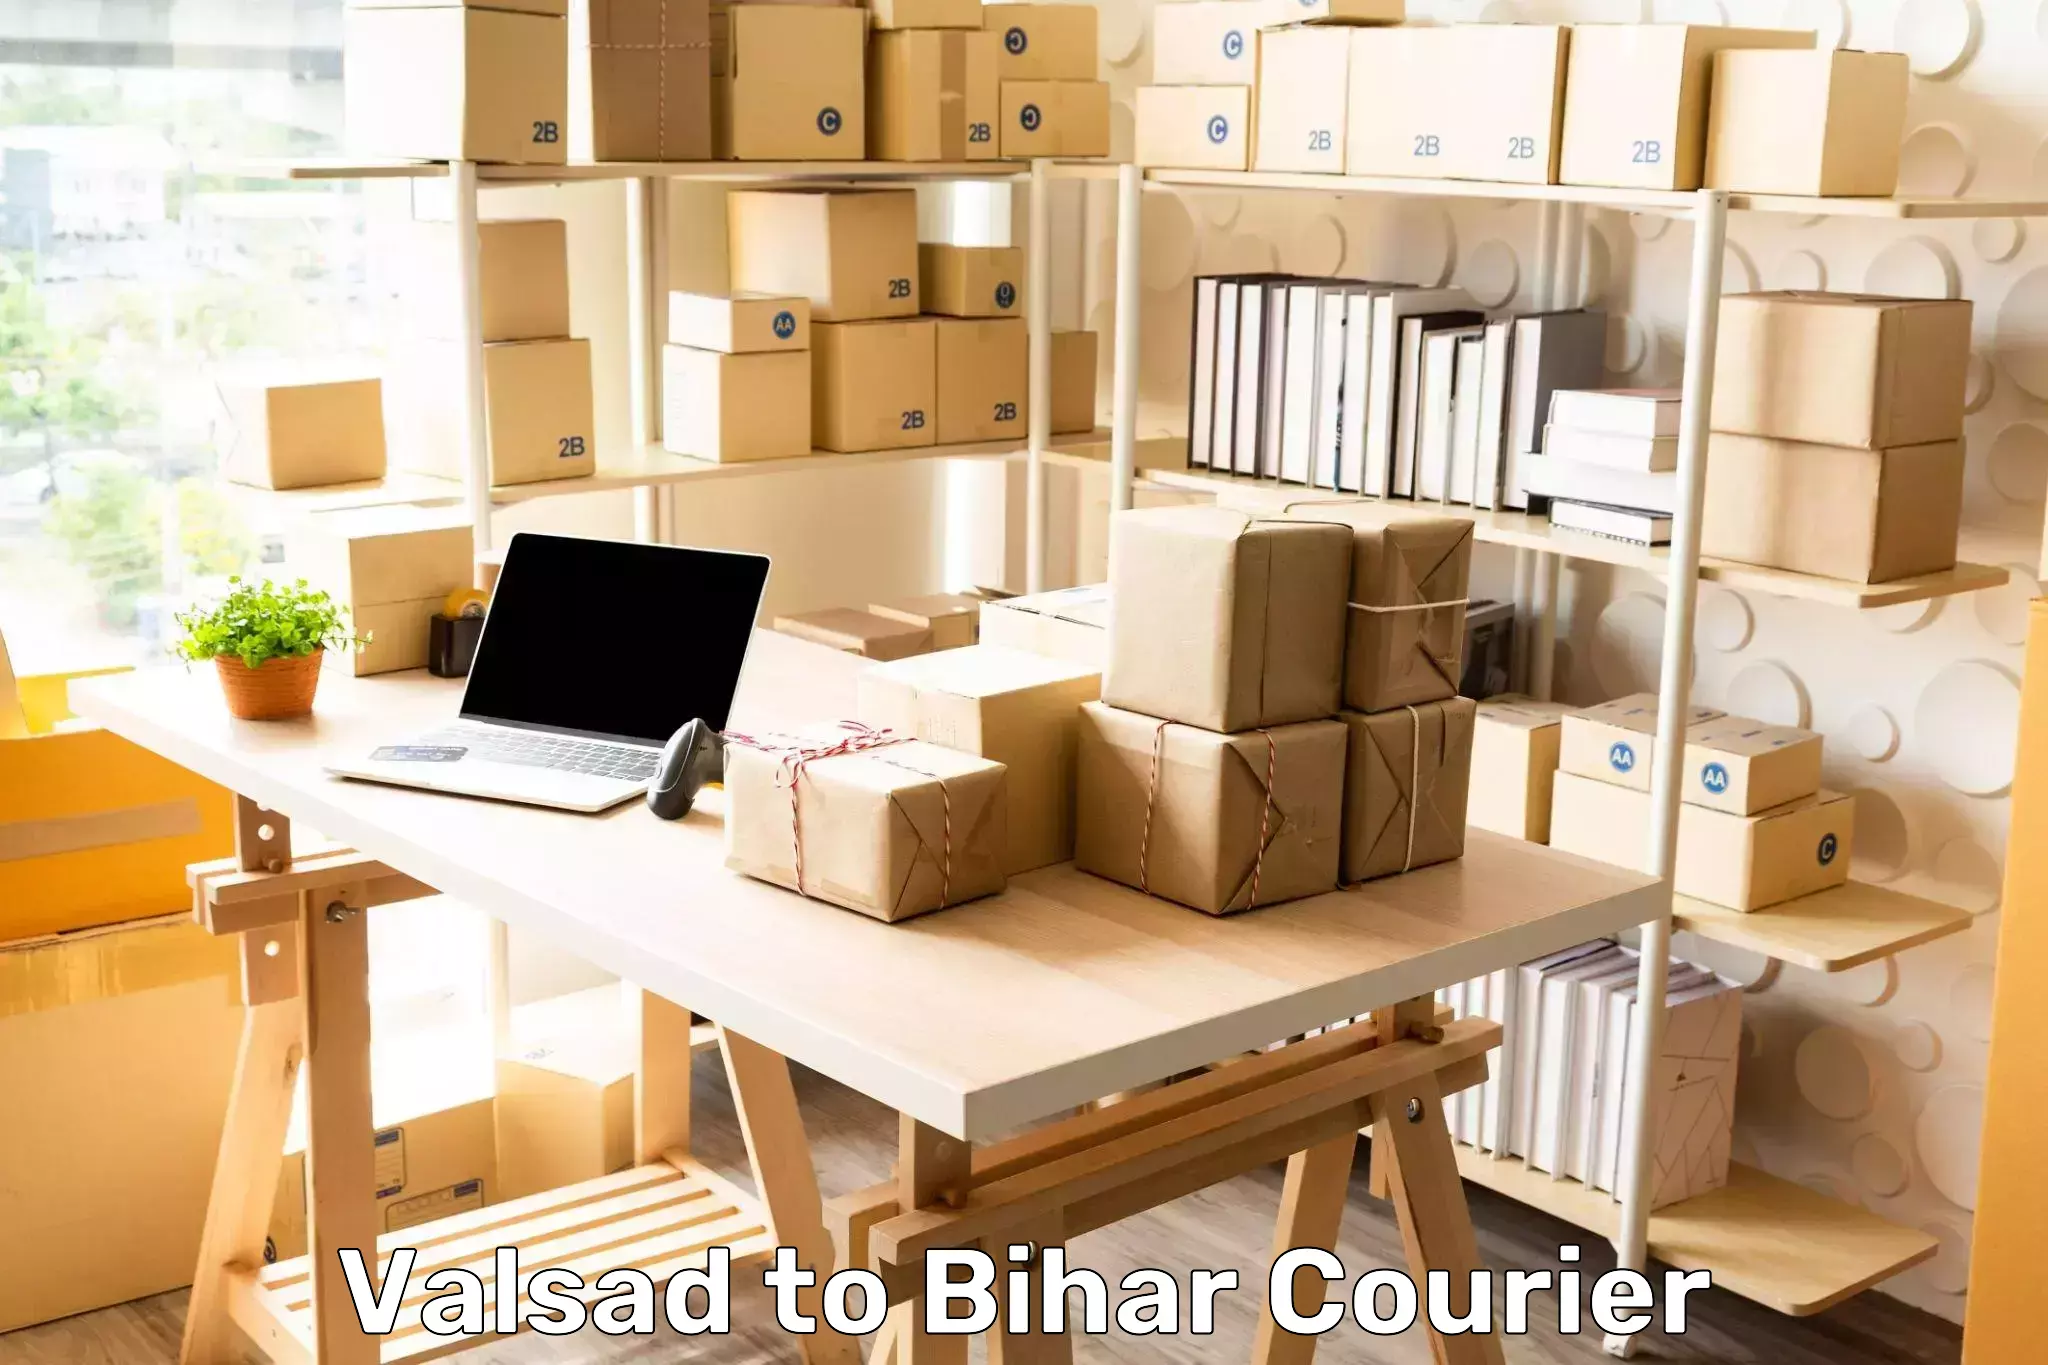 Multi-national courier services Valsad to Marhowrah